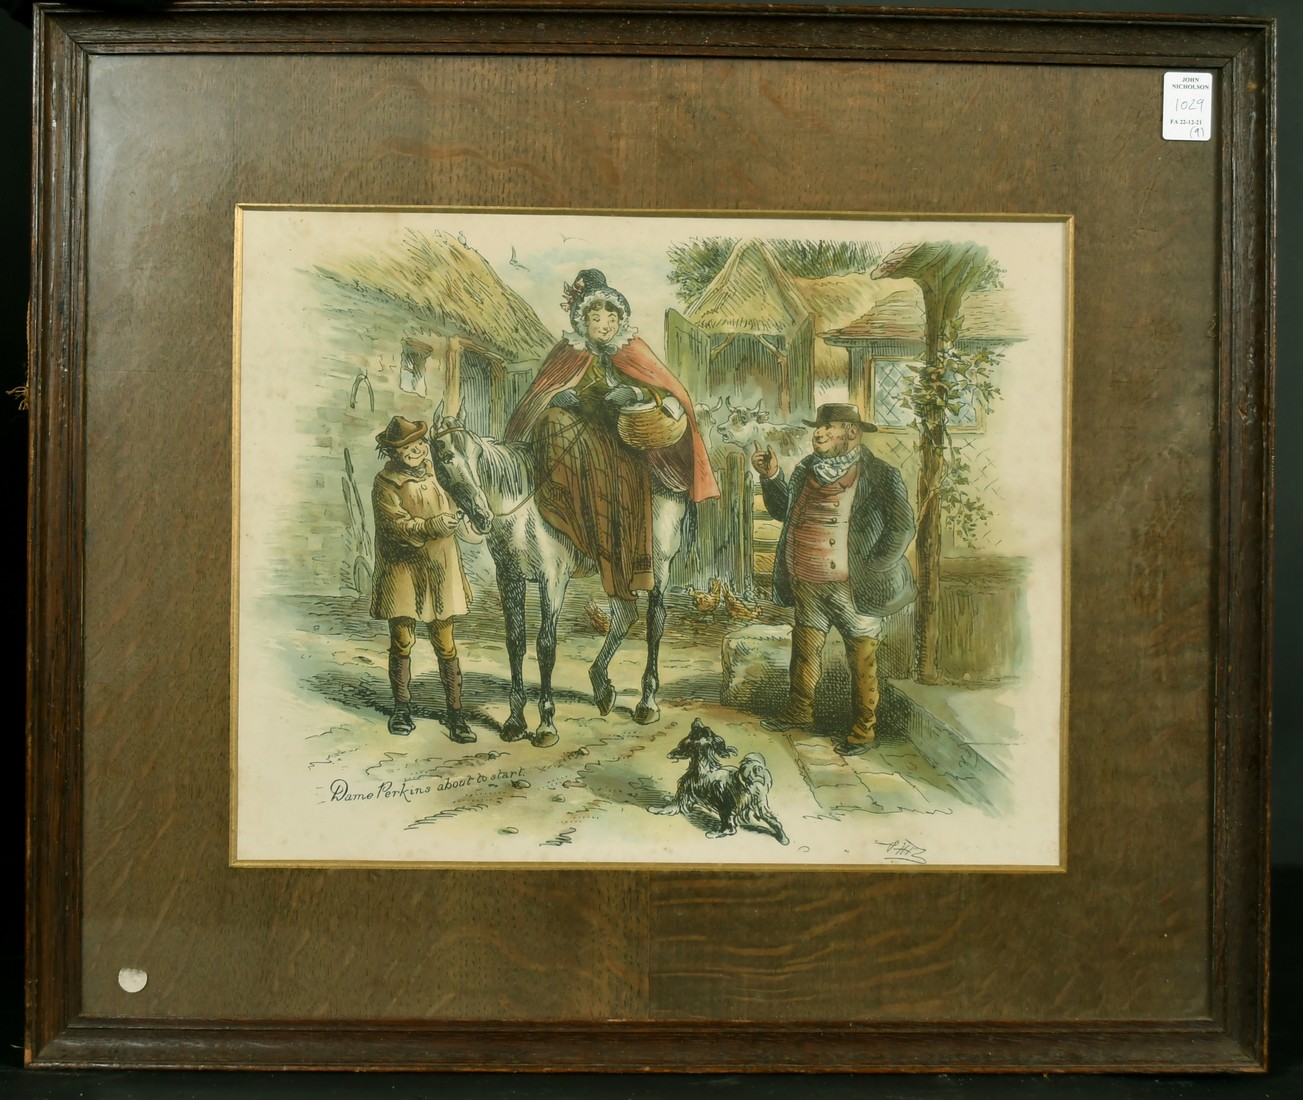 Hablot Knight Browne (1815-1882) 'Phiz', Dame Perkins and her Grey Mare, a set of 8 coloured prints, - Image 8 of 10